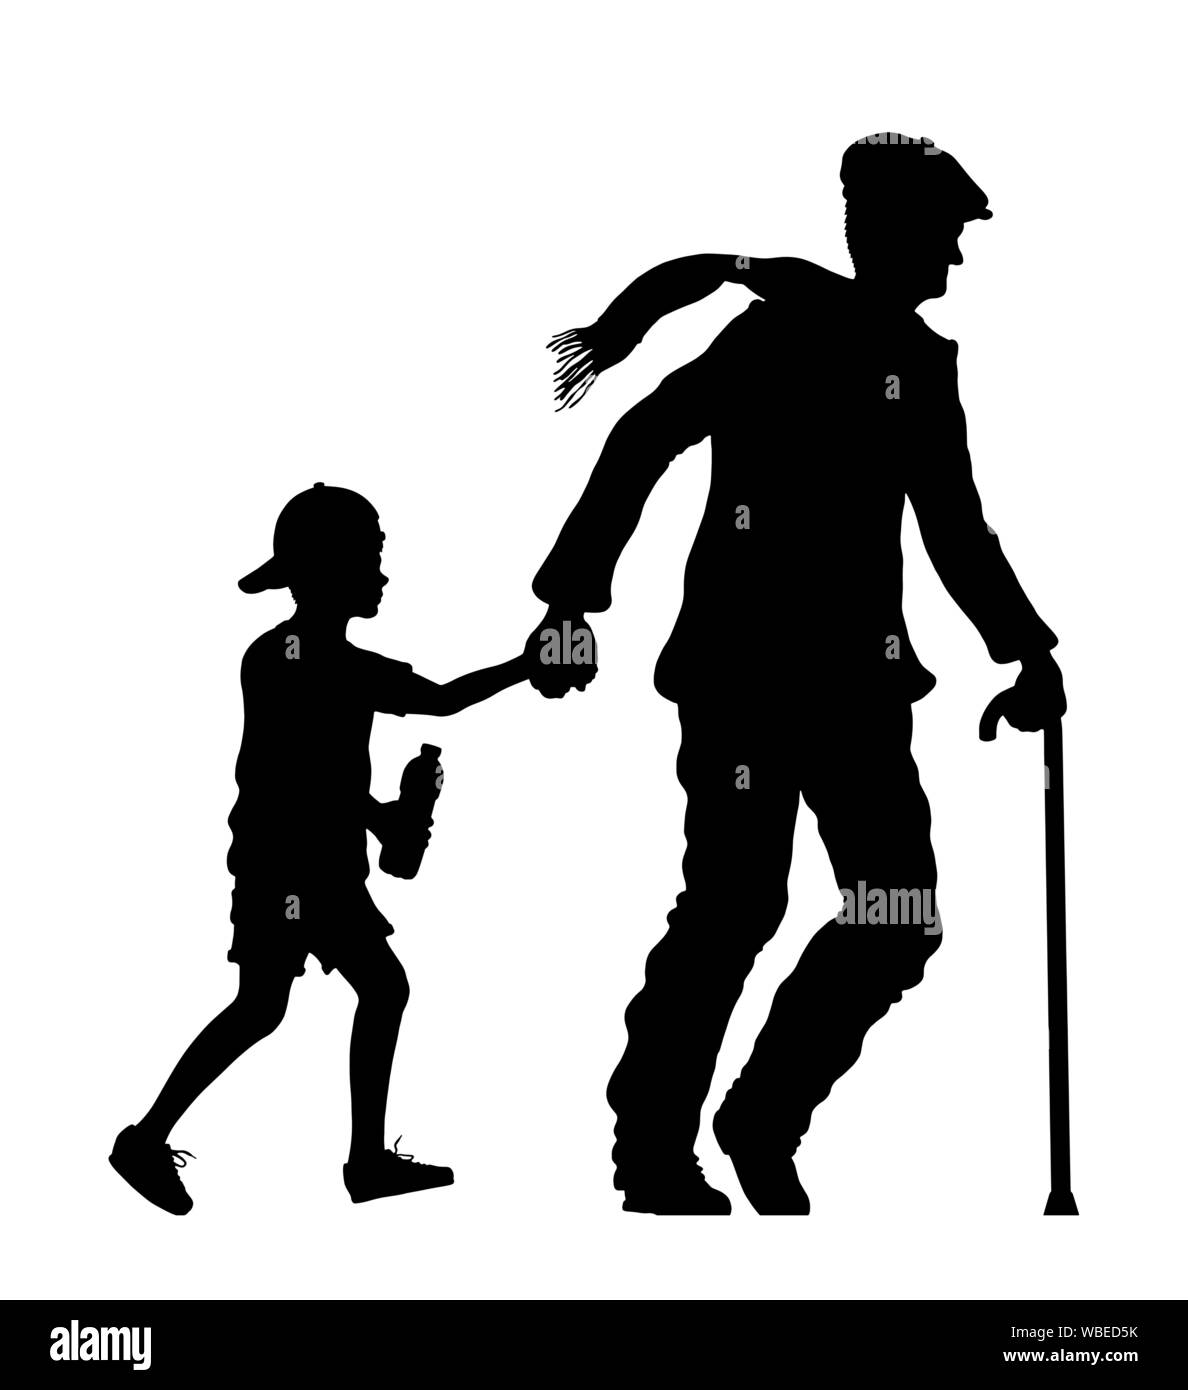 Immigrant old man and his grandson silhouette. The silhouette objects and background are in different layers. Stock Vector